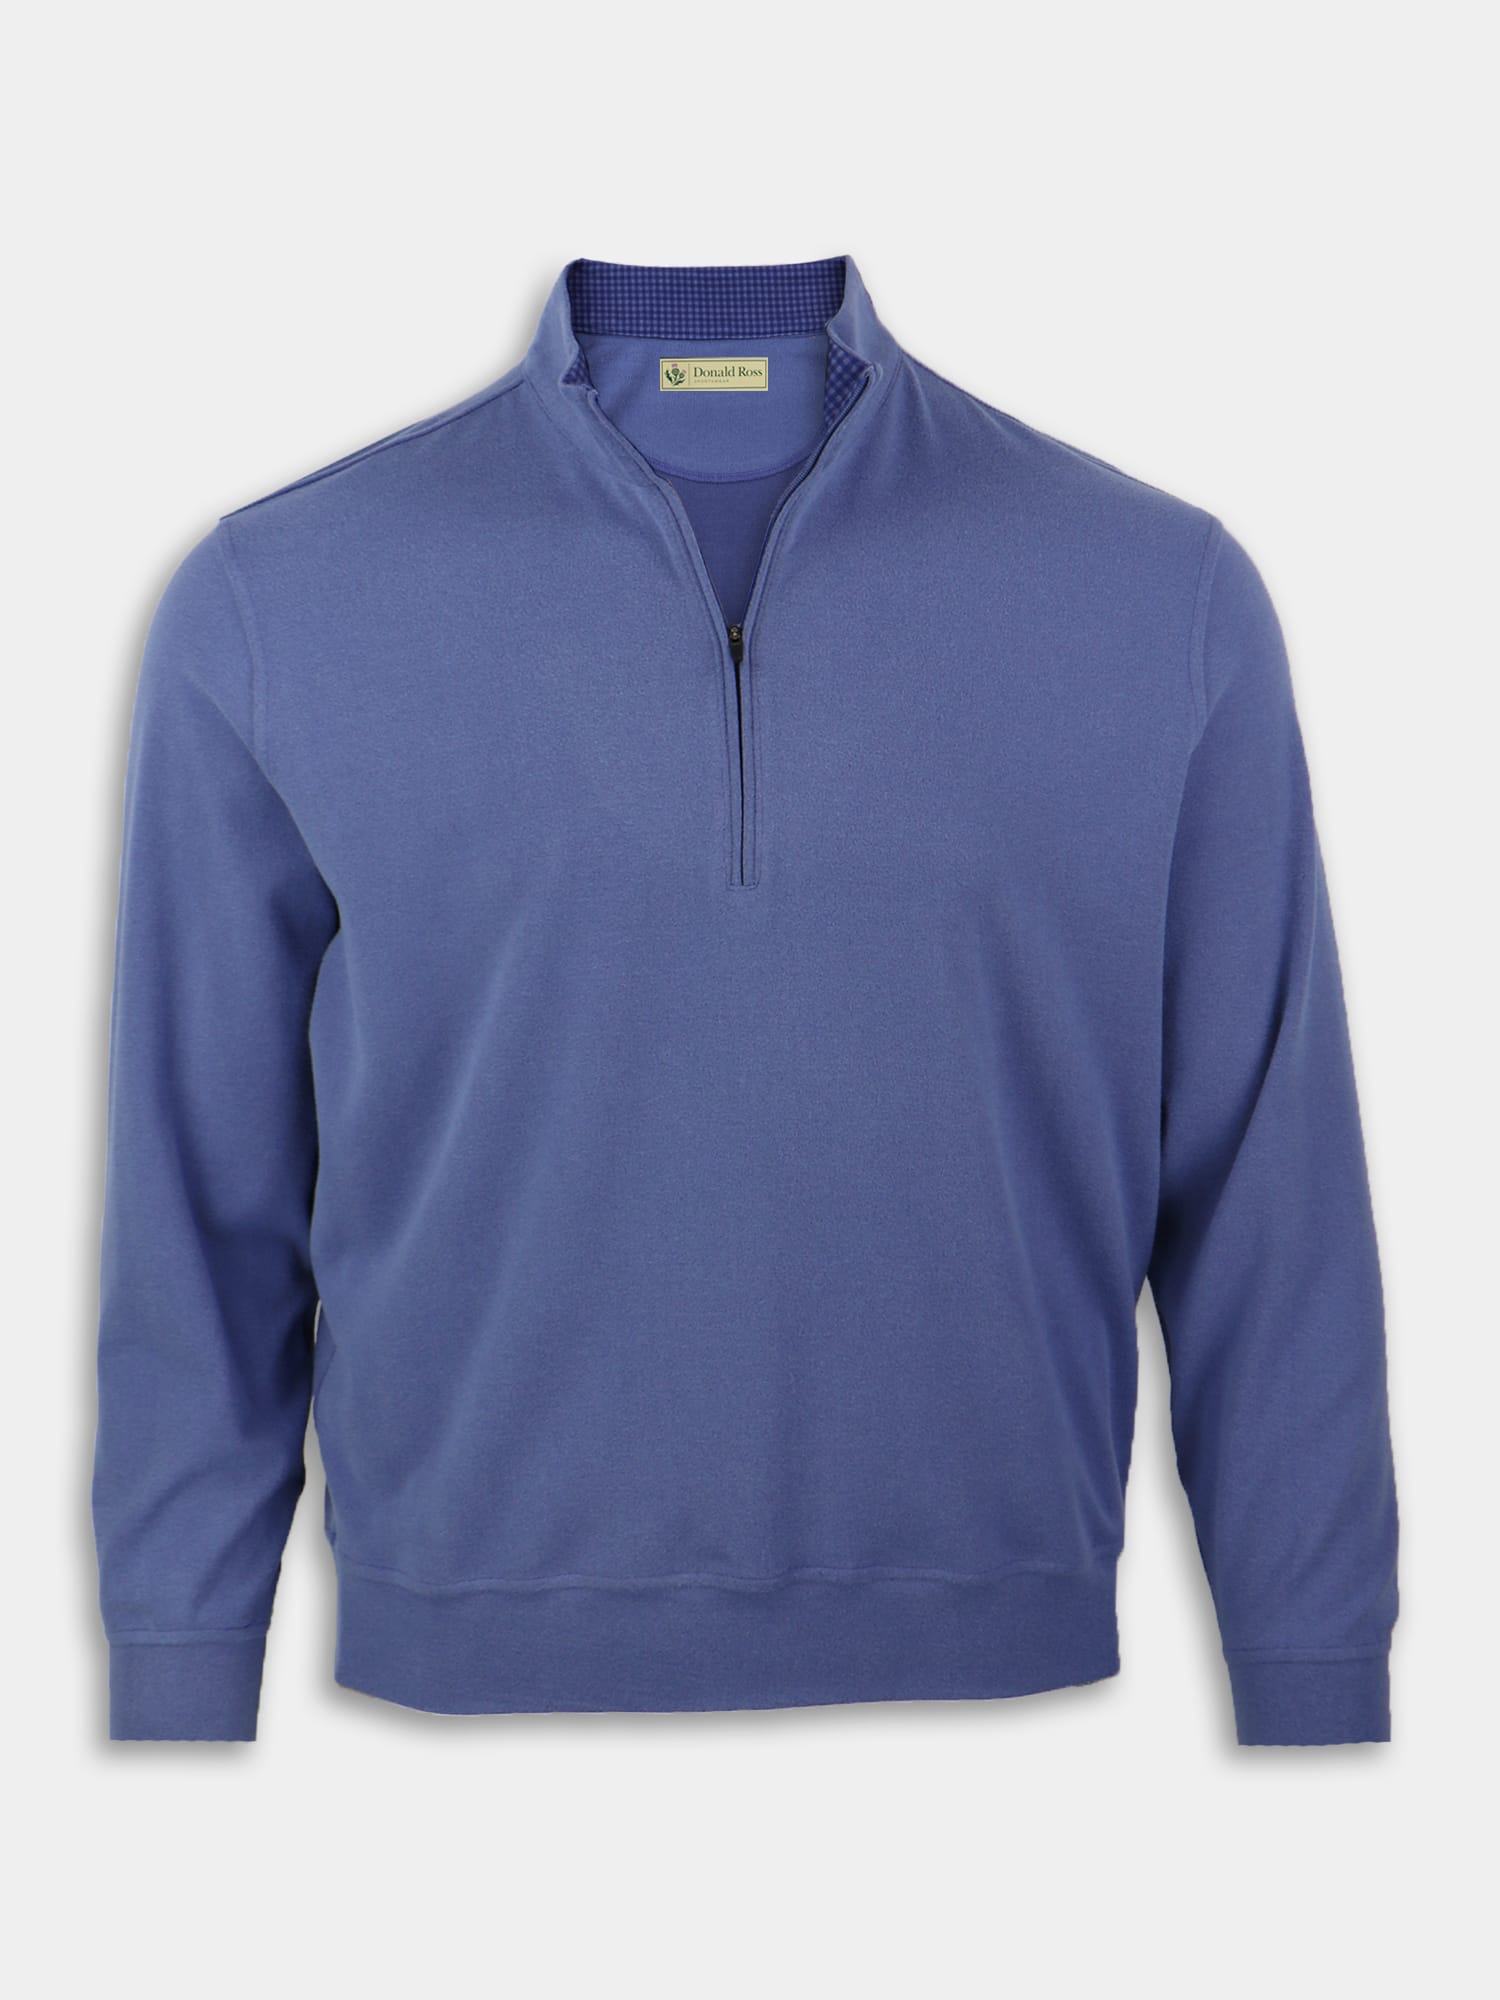 The Year Rounder Pullover - Donald Ross Sportswear